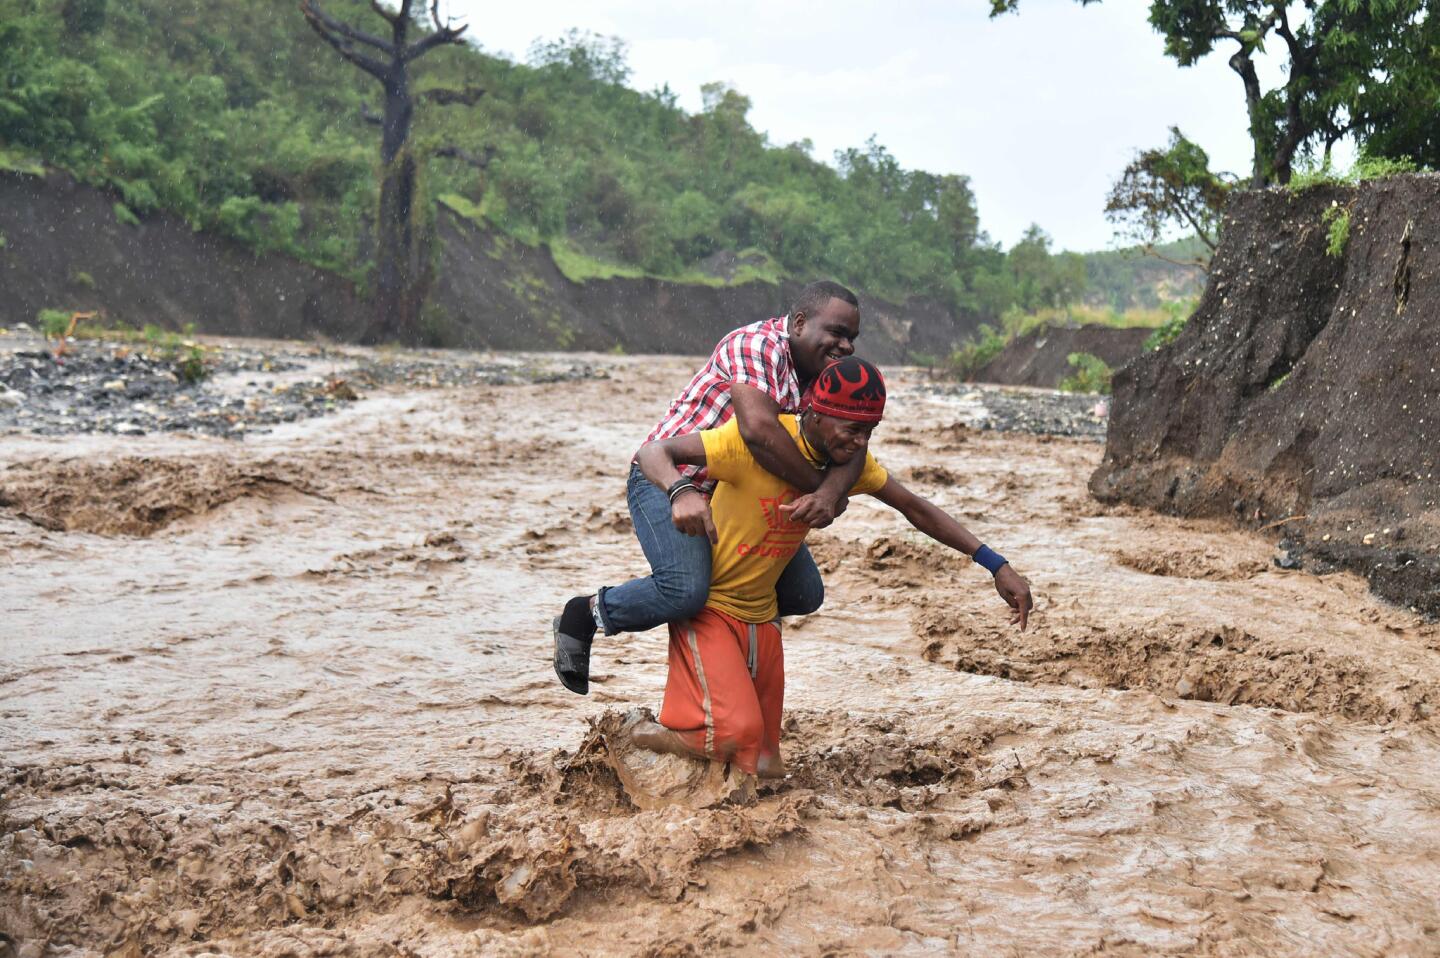 A man is carried across the river La Digue in Petit Goave where the bridge collapsed during the rains of the Hurricane Matthew, southwest of Port-au-Prince, Haiti, on Oct. 5, 2016.